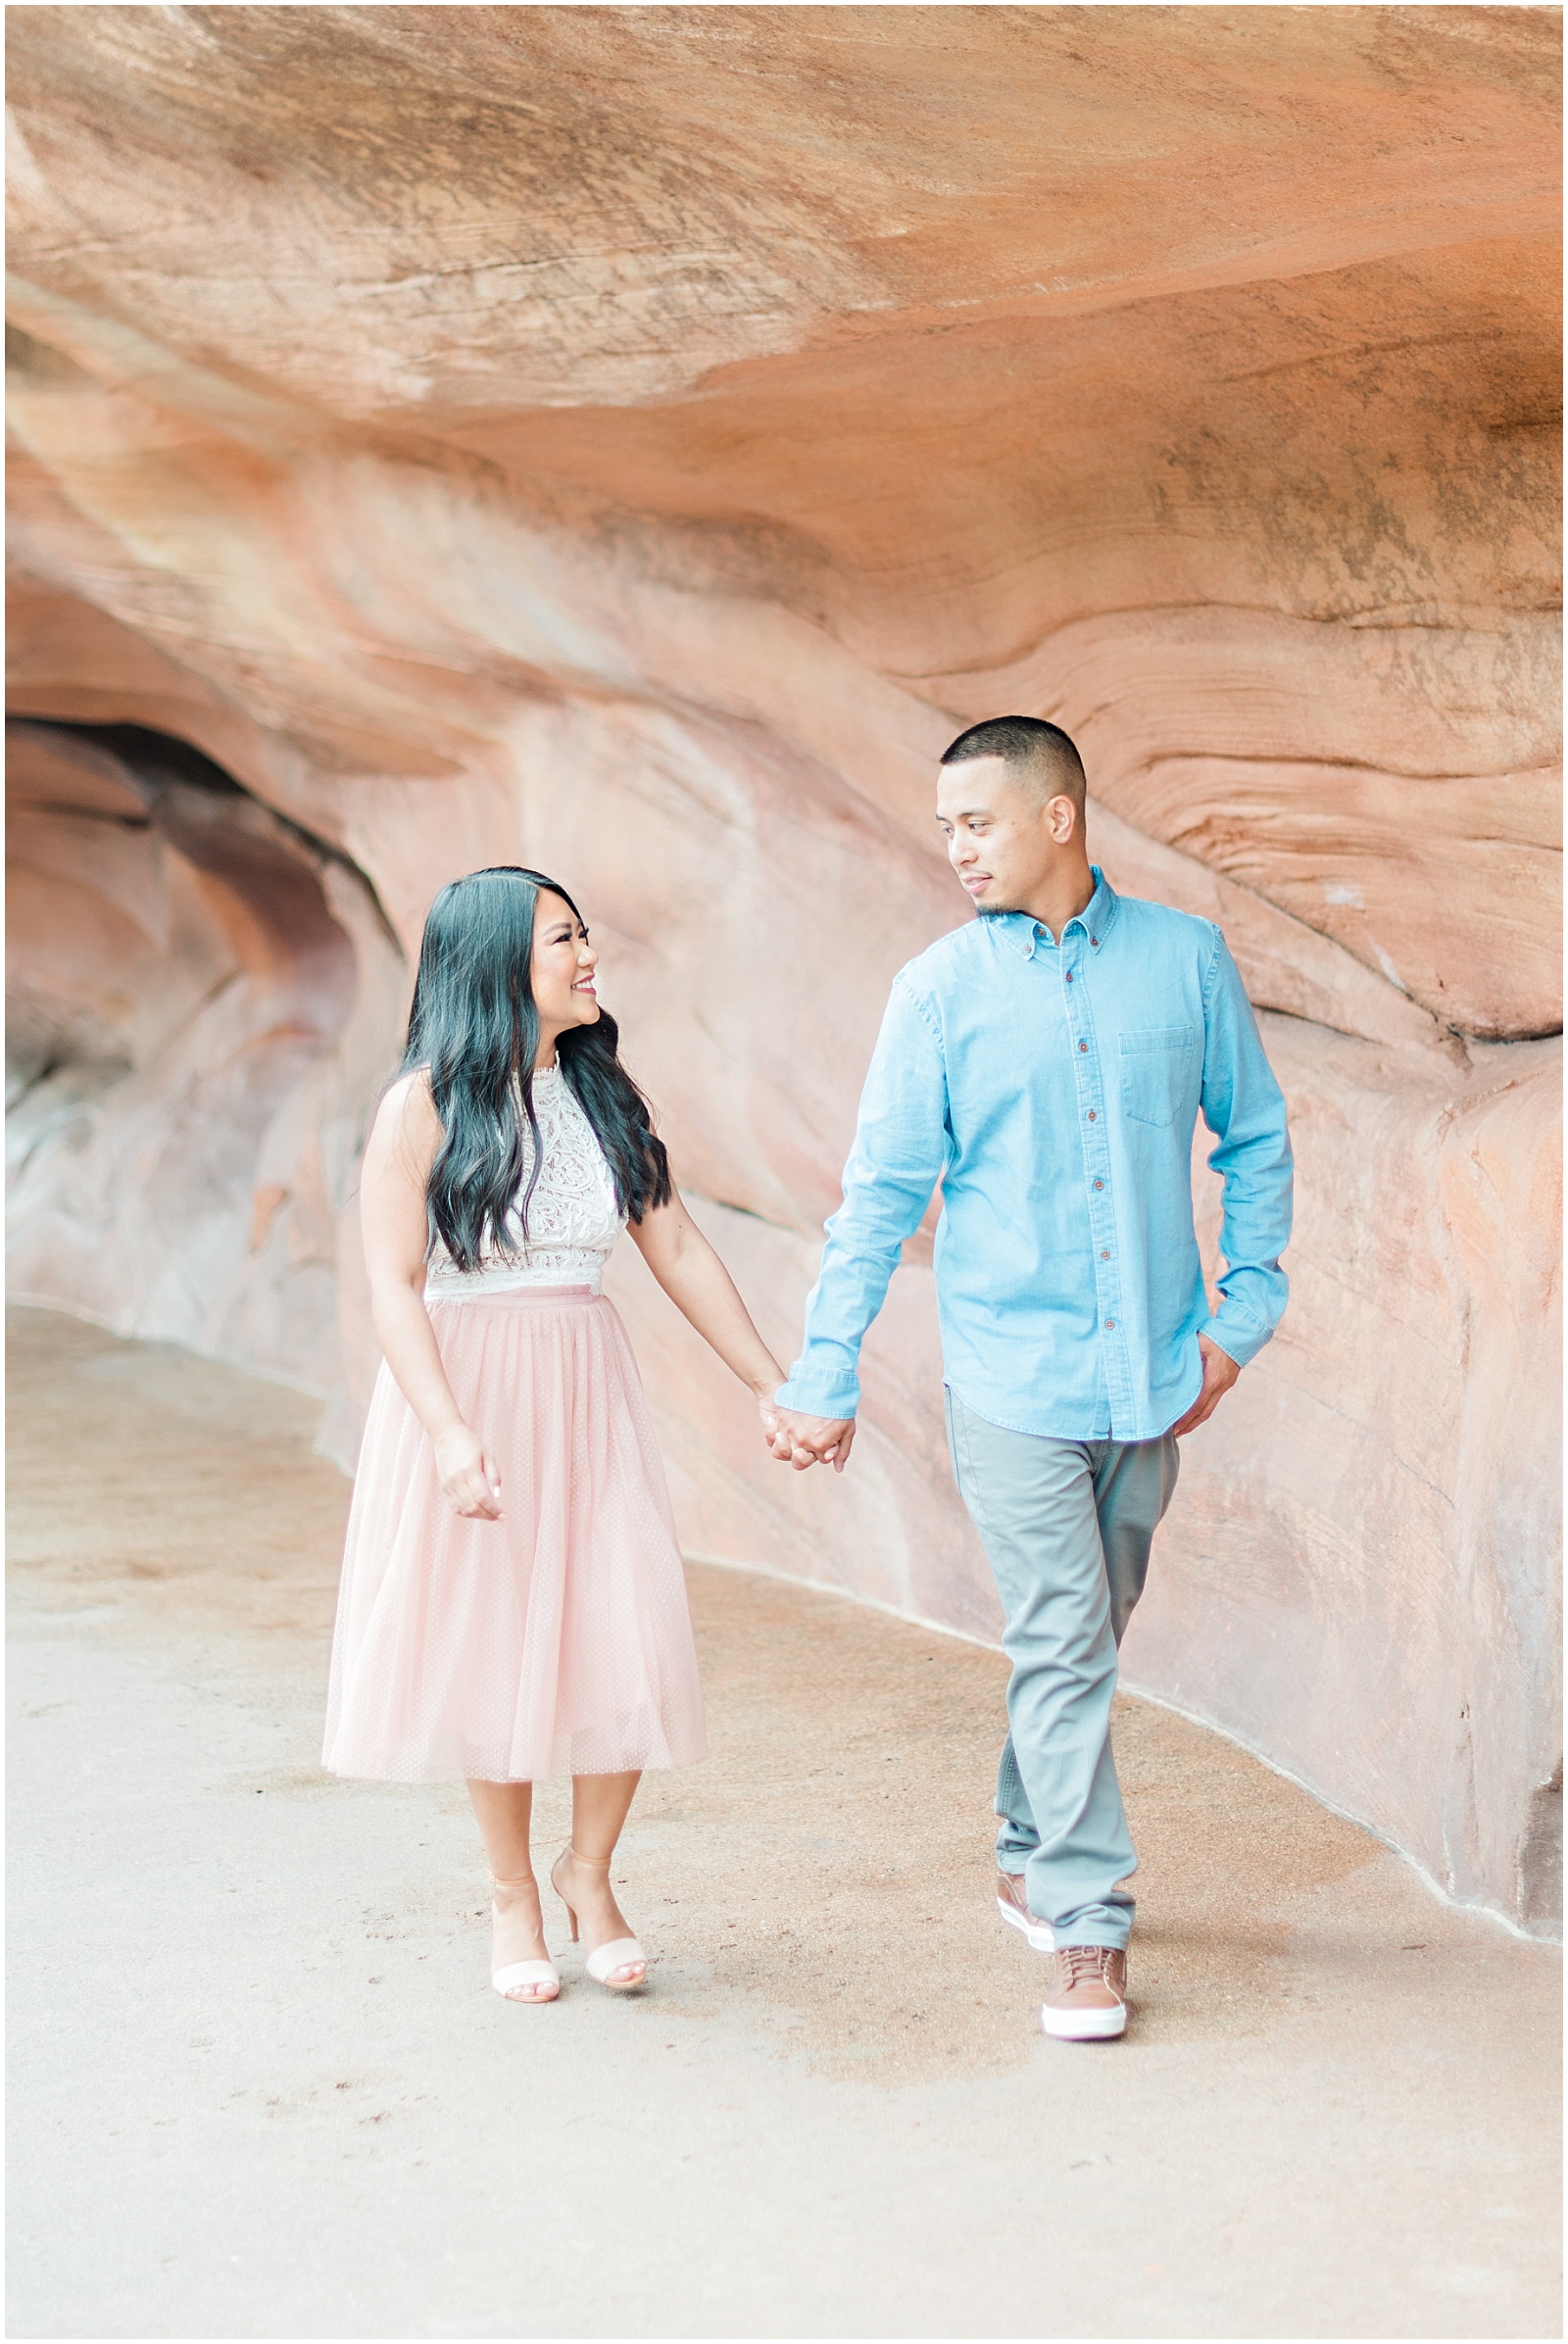 Disneyland Engagement Session.  Photography by Mollie Jane Photography.  To see more go to www.molliejanephotography.com